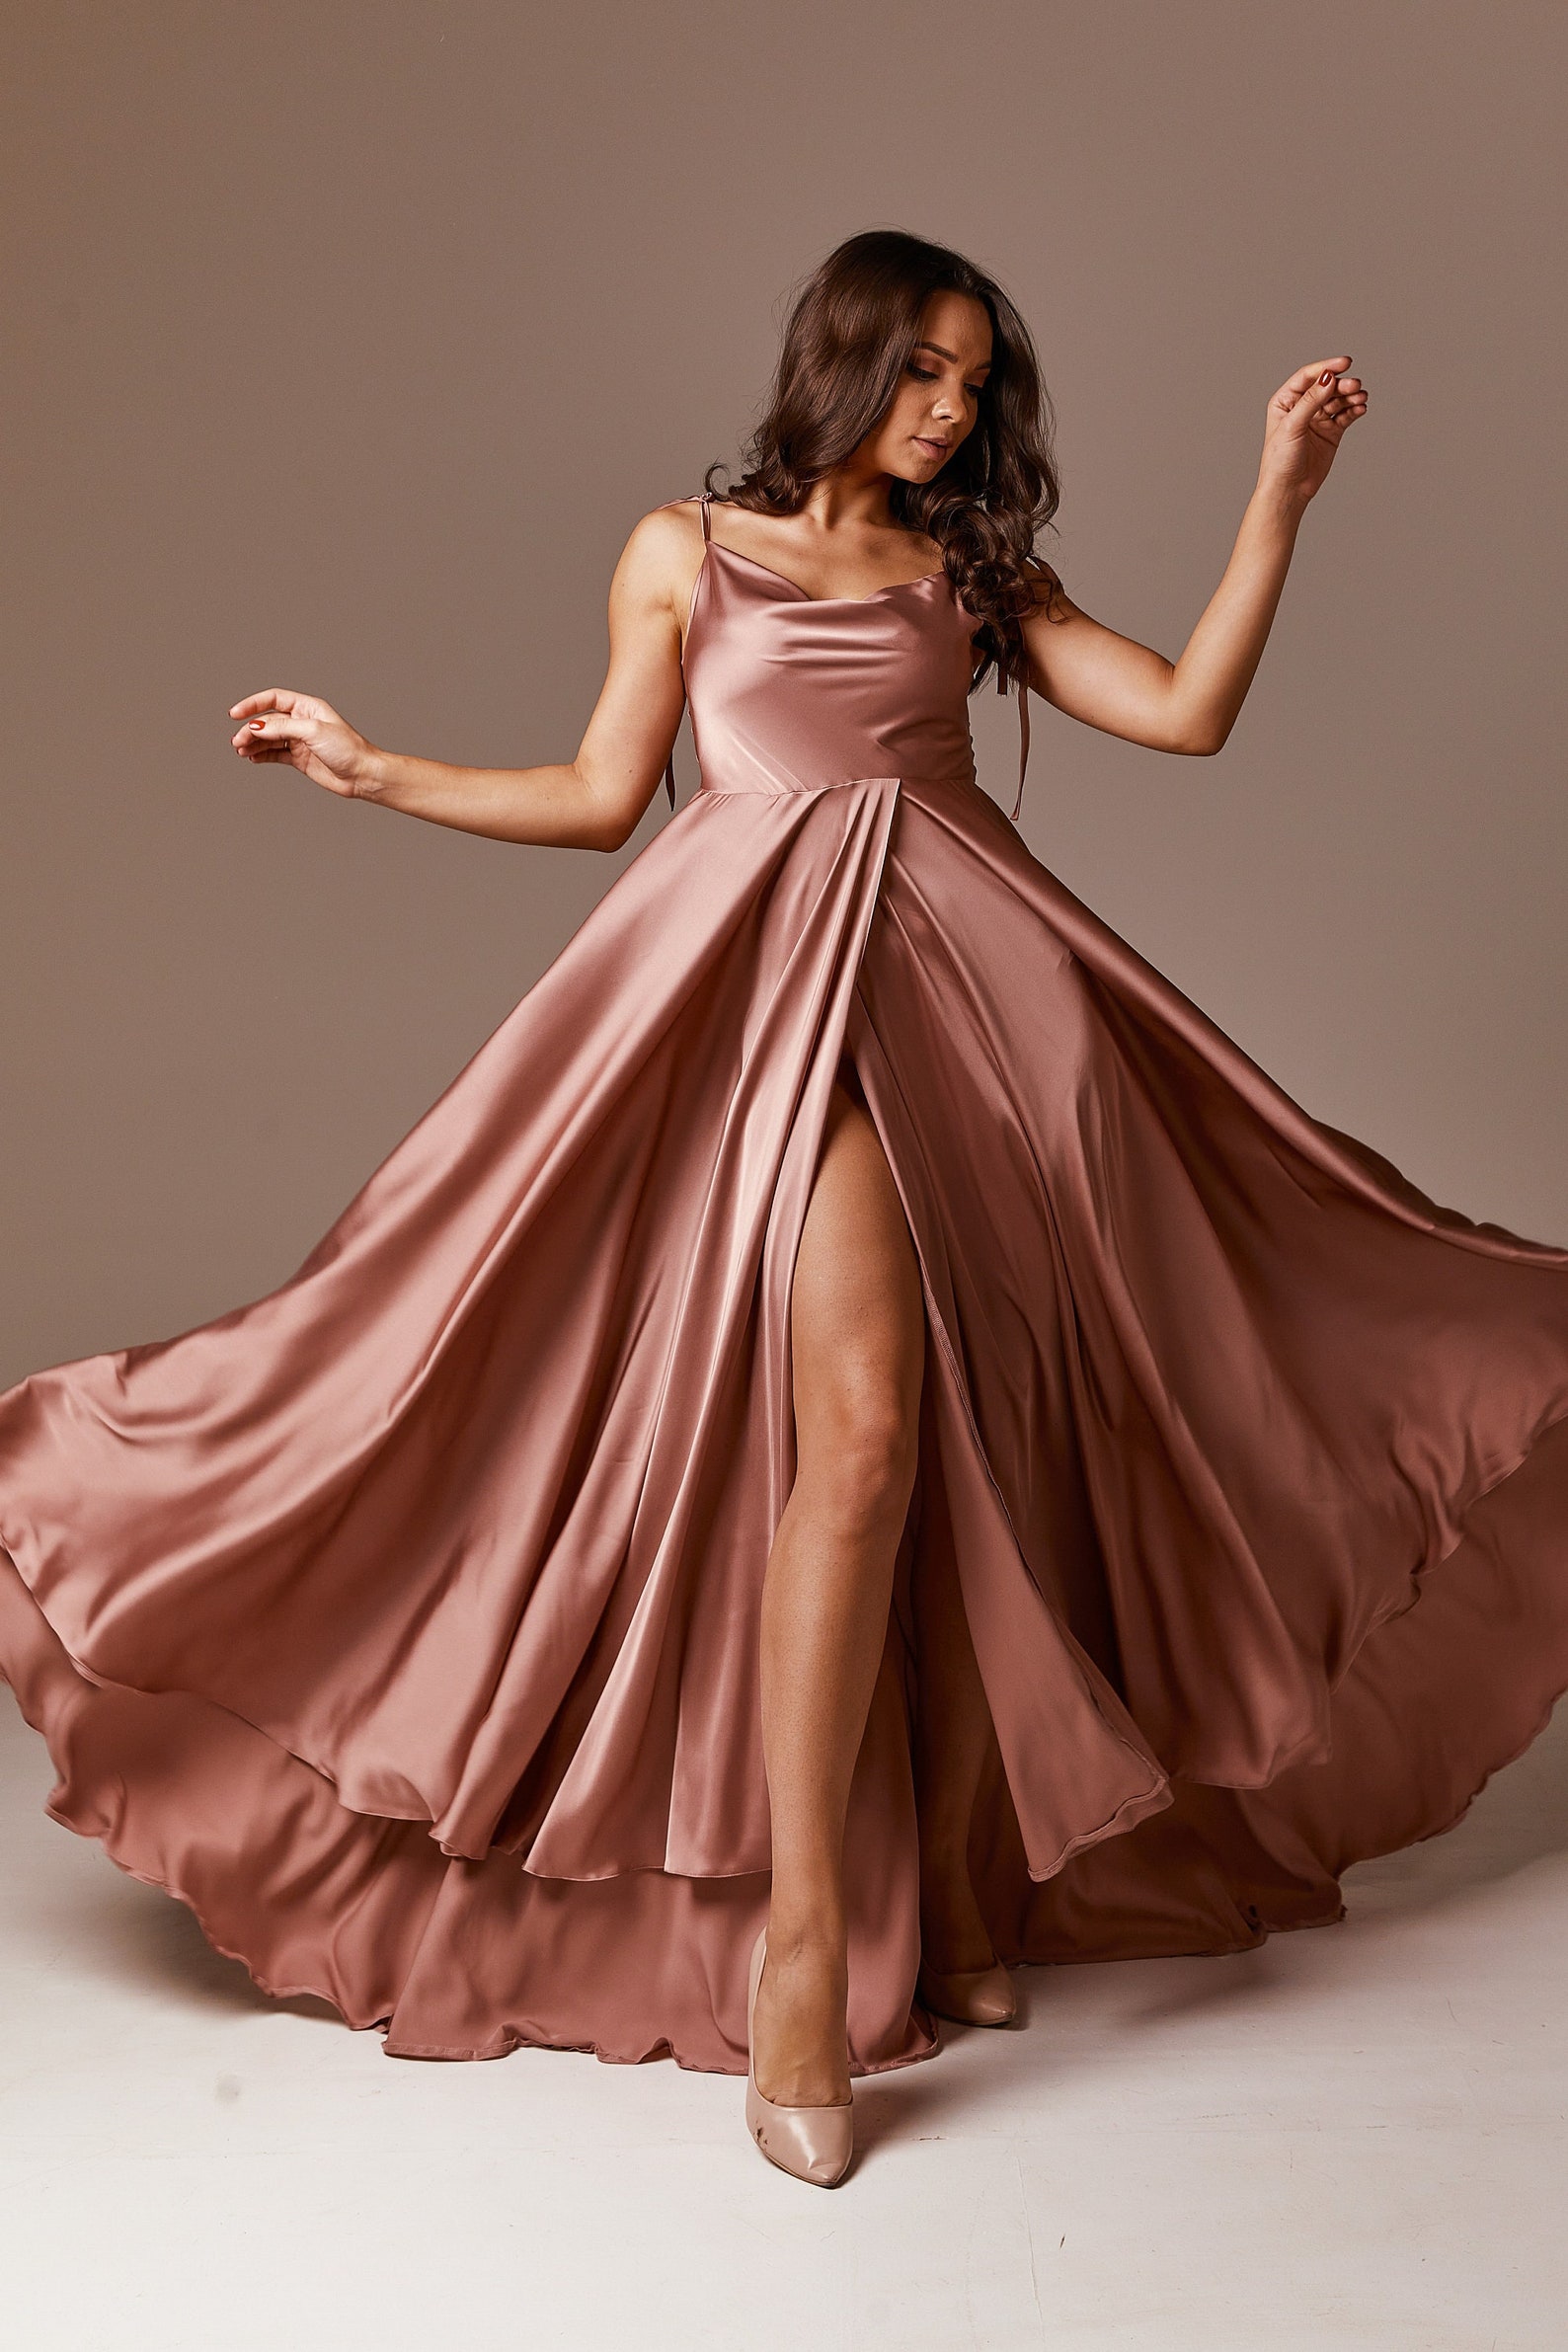 The Most Stunning Rose Gold Bridesmaid Dresses in Every Style